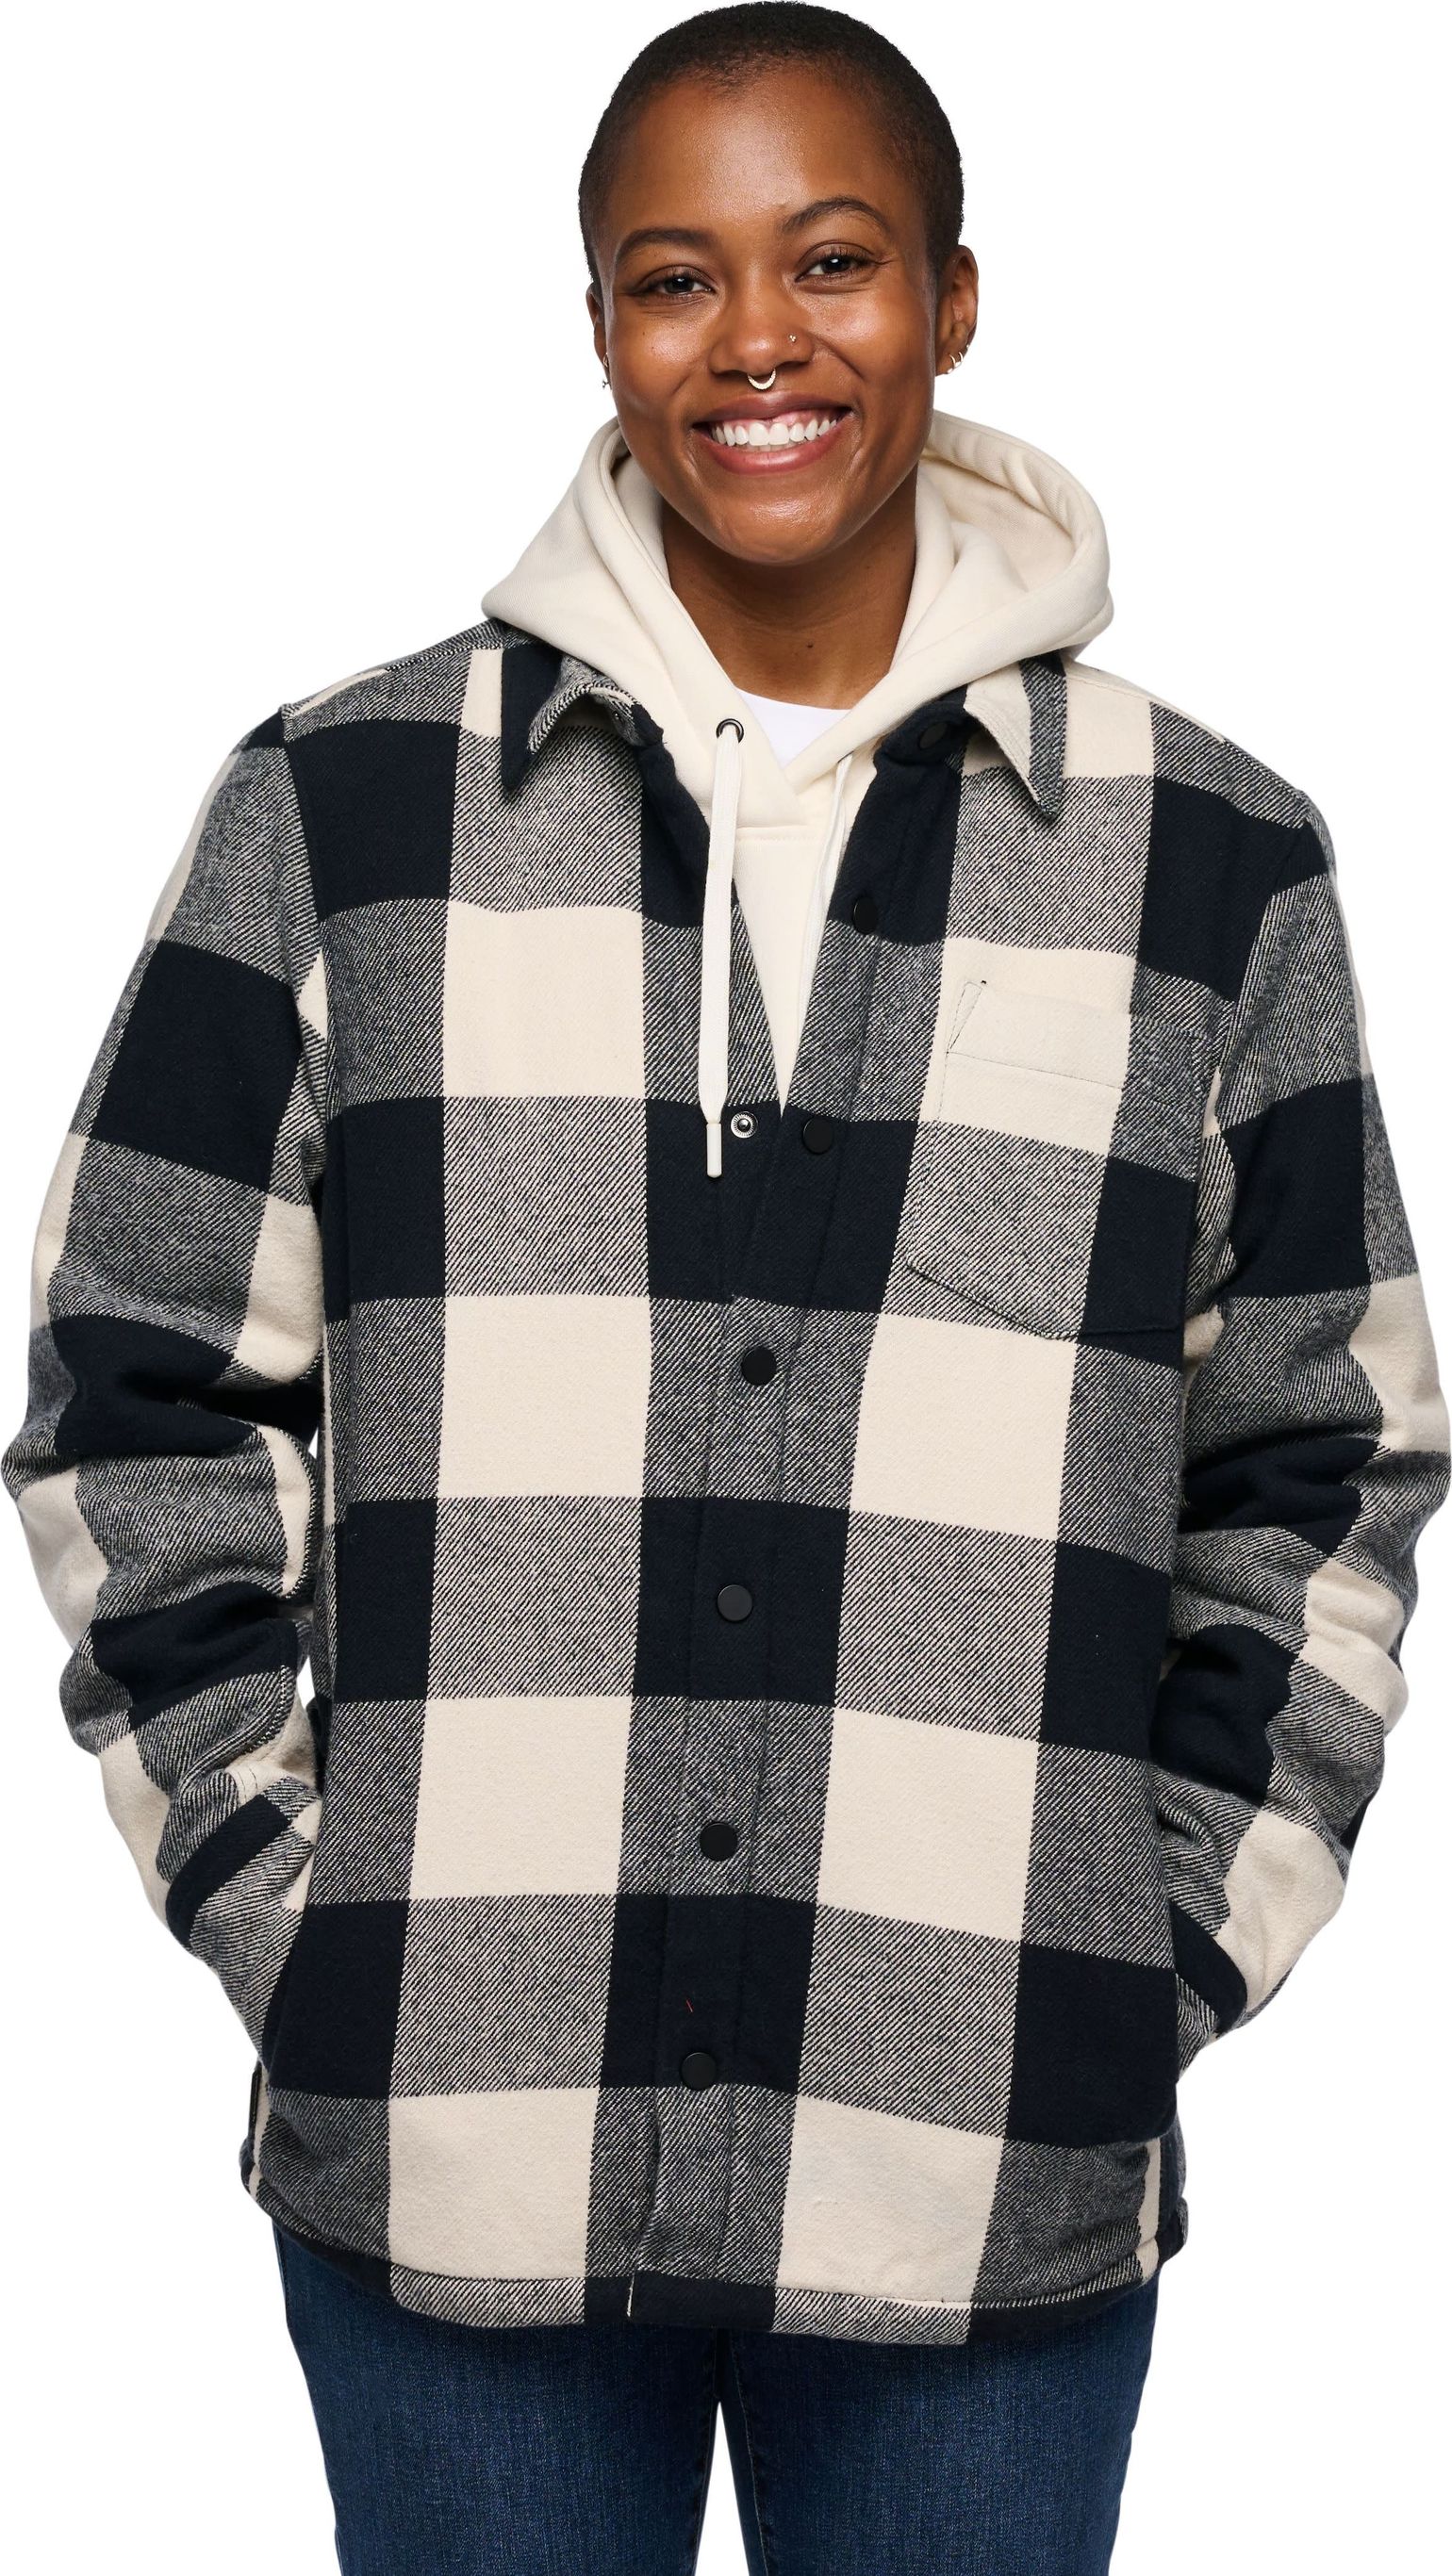 Women's Project Lined Flannel Shirt Black-Off White Plaid